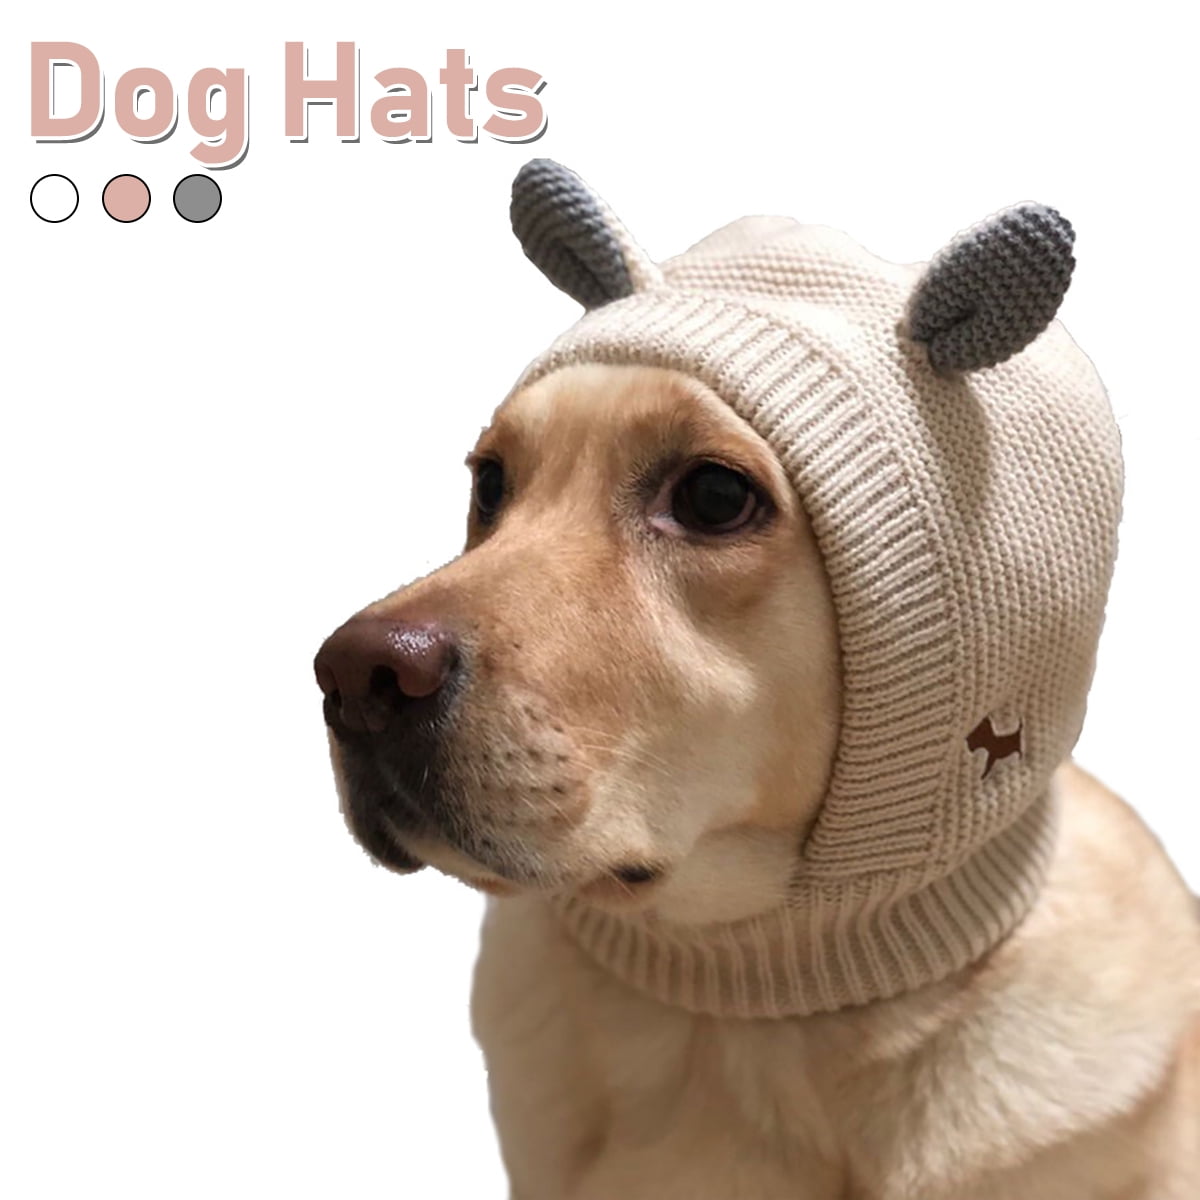 Dog Ear Muffs Noise Protection Knitted Dog Hats Pet Ears Warm Dog Ear Cover Winter Hat Dog Snood Head Wrap Bunny Costume for Medium to Large Dogs Cats Pets Quiet Ears for Dogs 